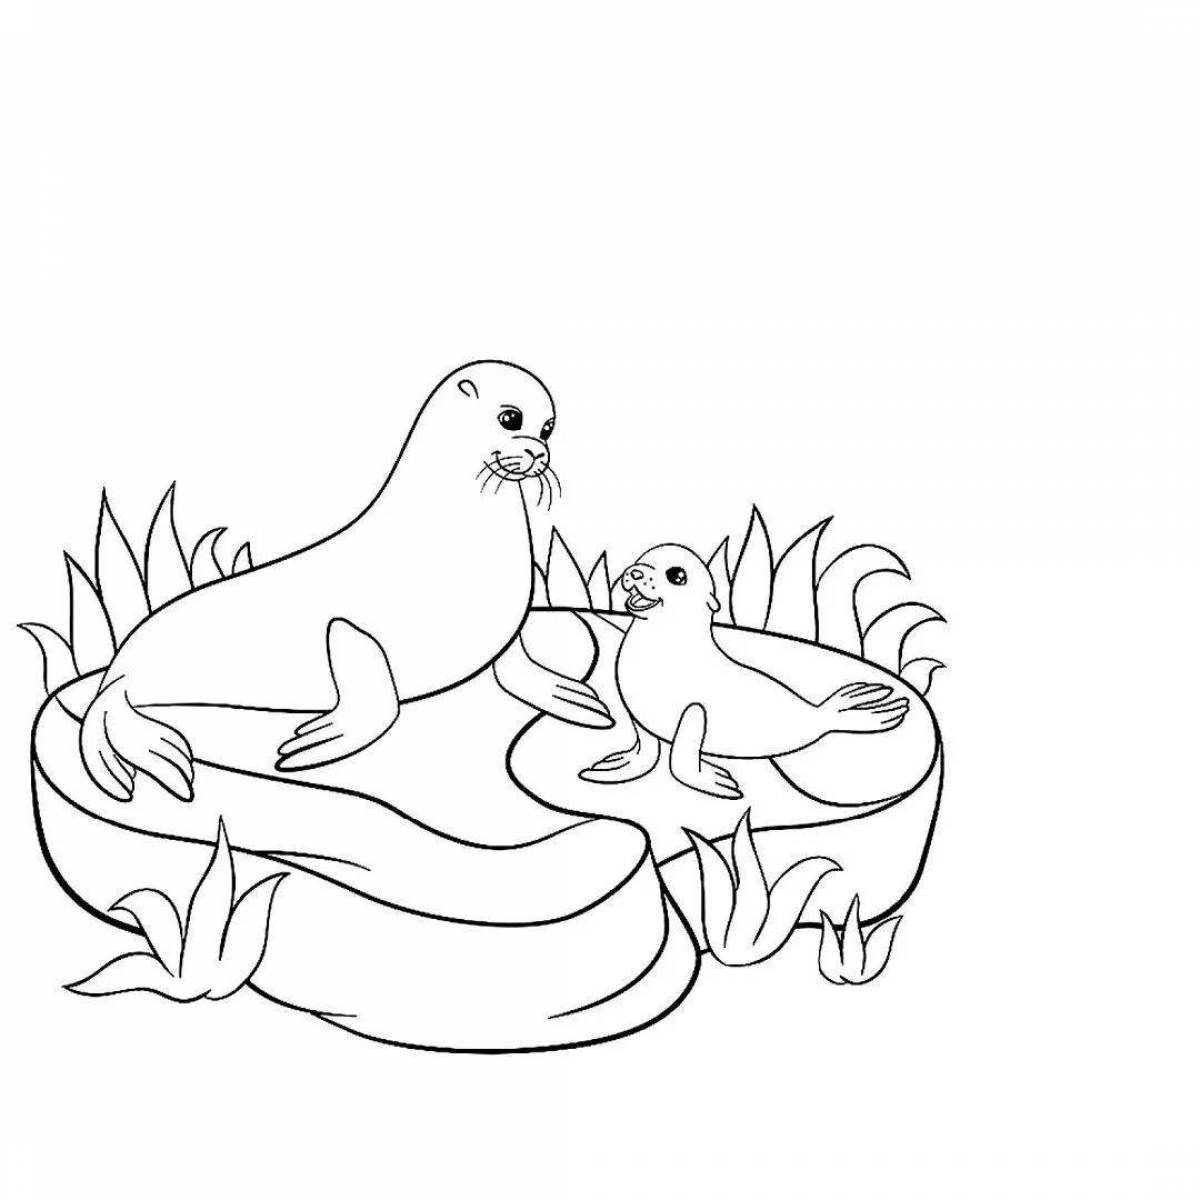 Charming seal on ice coloring book